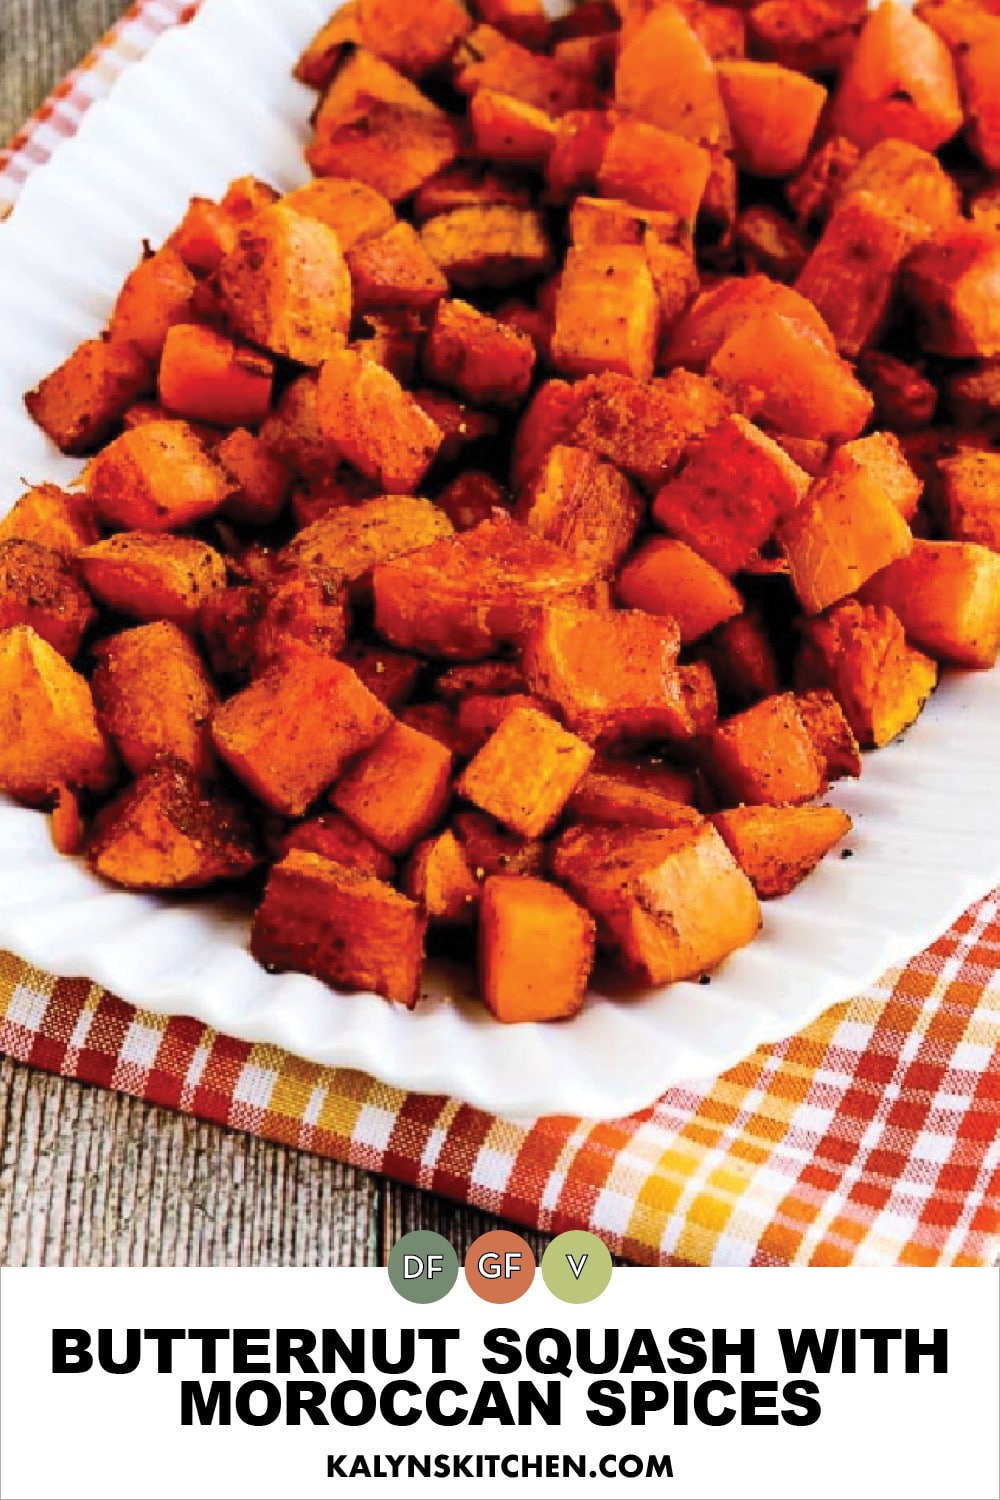 Pinterest image of Butternut Squash with Moroccan Spices